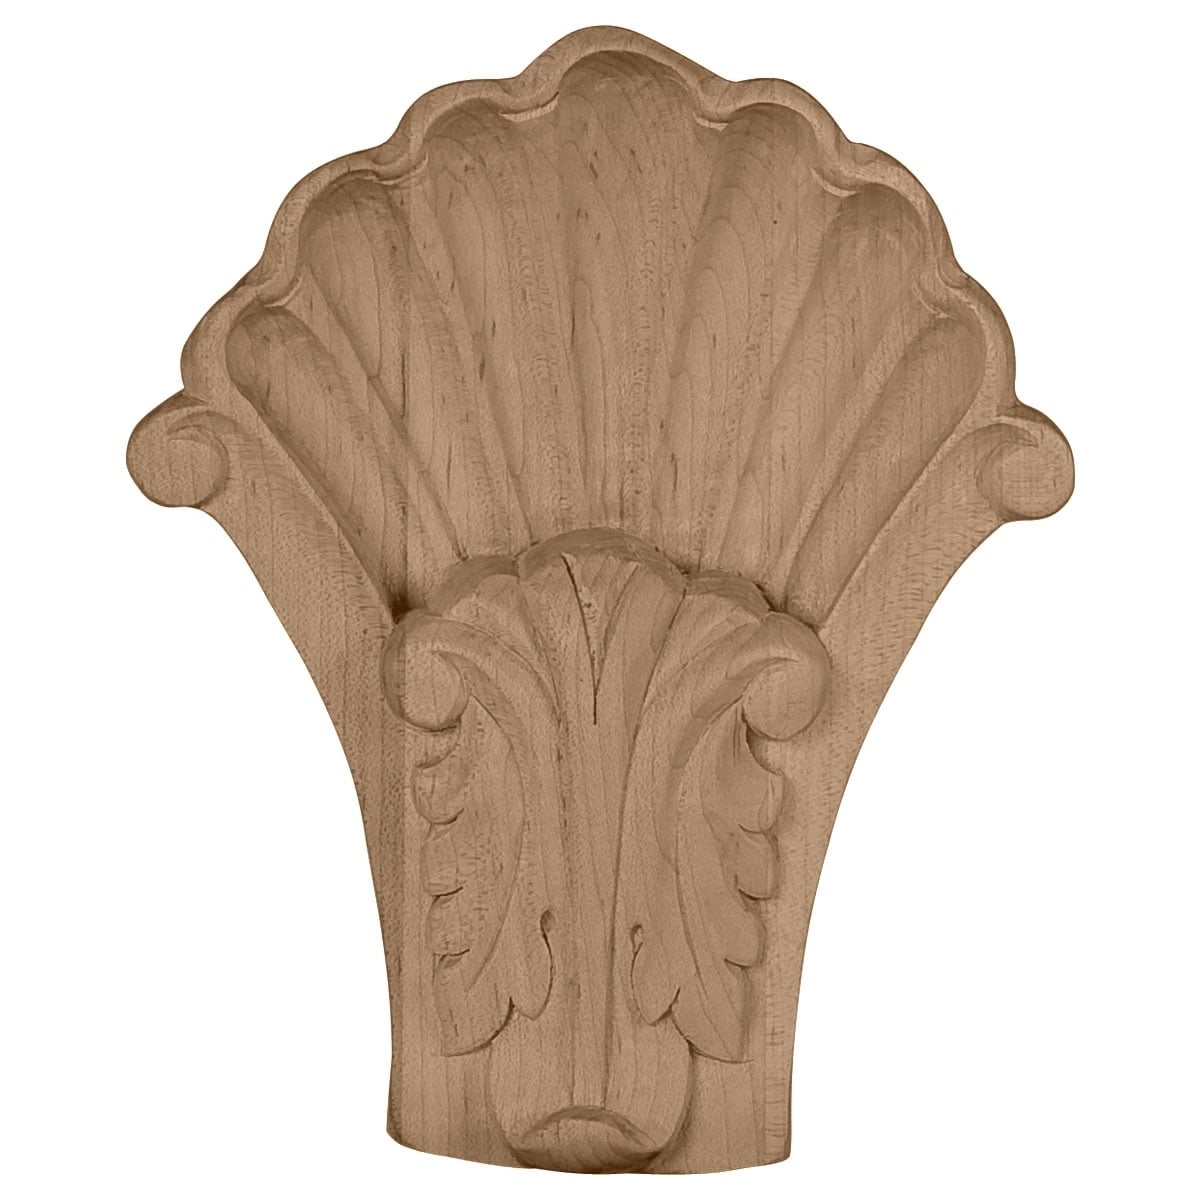 Acanthus in Shell Corbel